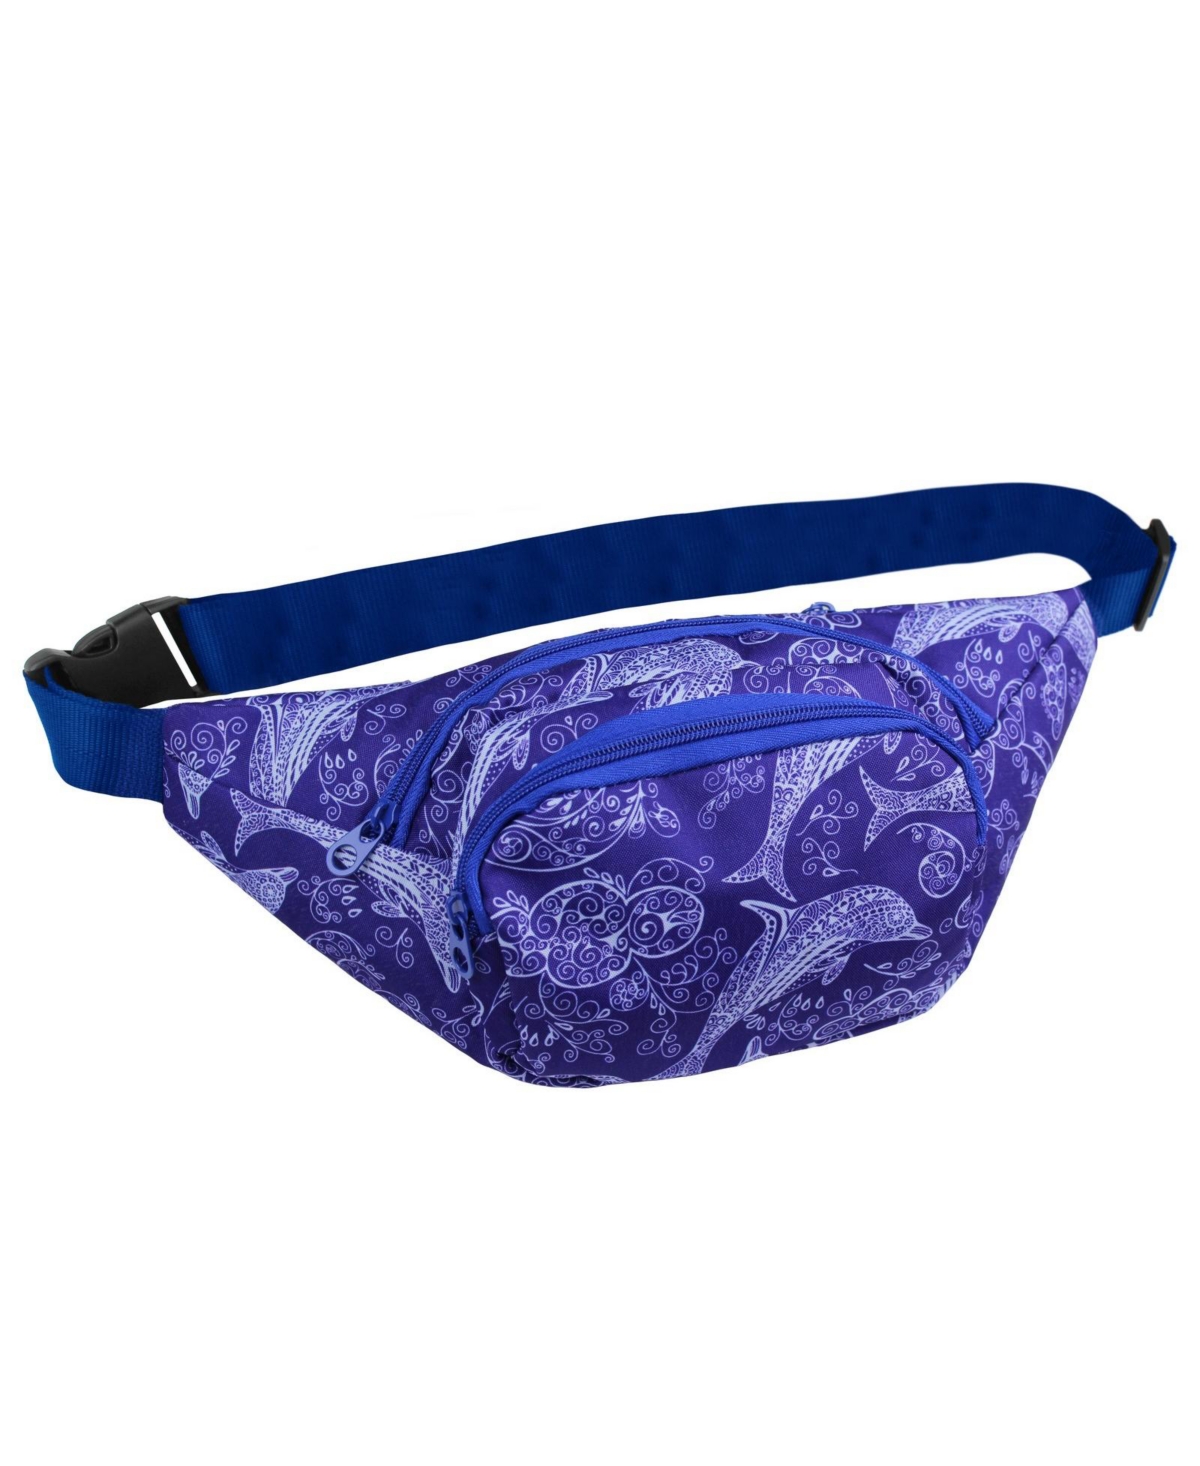 The Wildlife Edit 14-Inch Fanny Pack Adjustable Crossbody Waist Pack - Dolphins